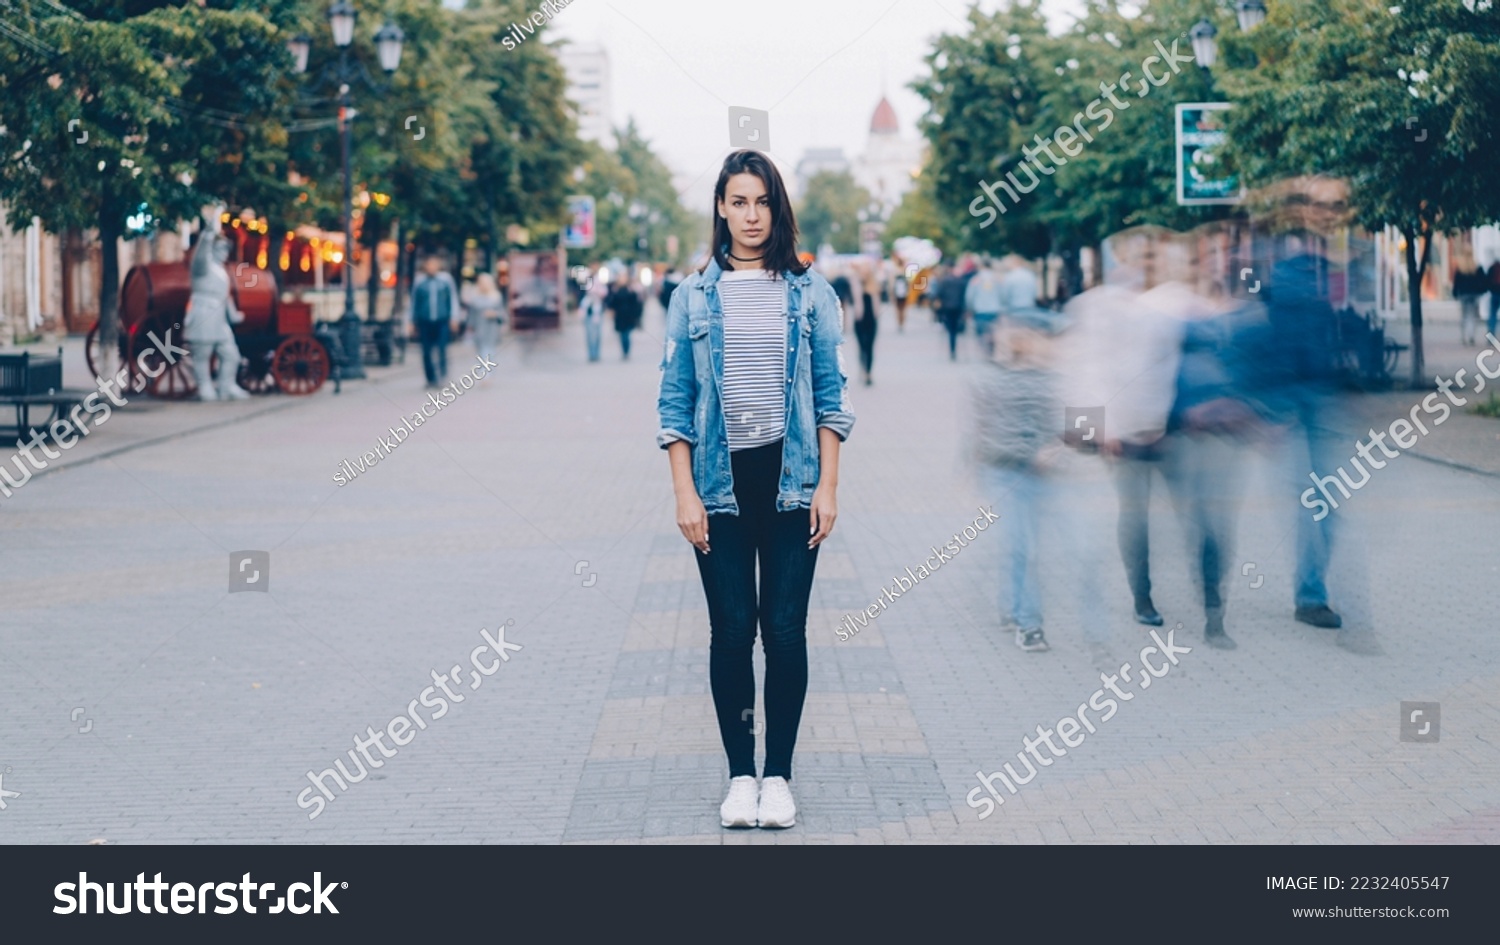 Portrait of pretty girl in trendy clothing looking at camera standing on pedestrian street by herself when busy men and women are moving around in haste. #2232405547